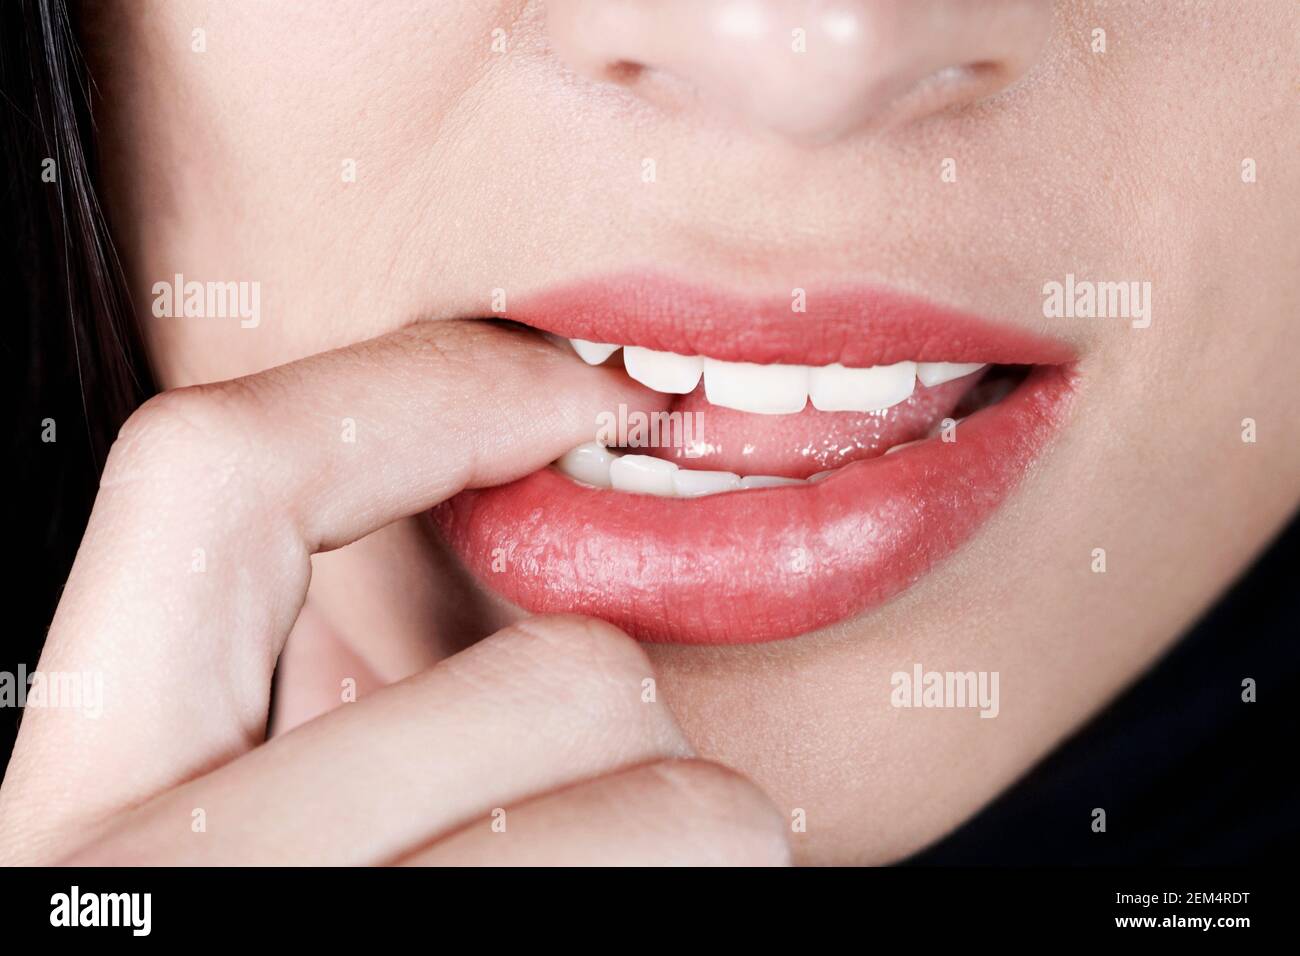 Close-up of a woman with her finger in her mouth Stock Photo